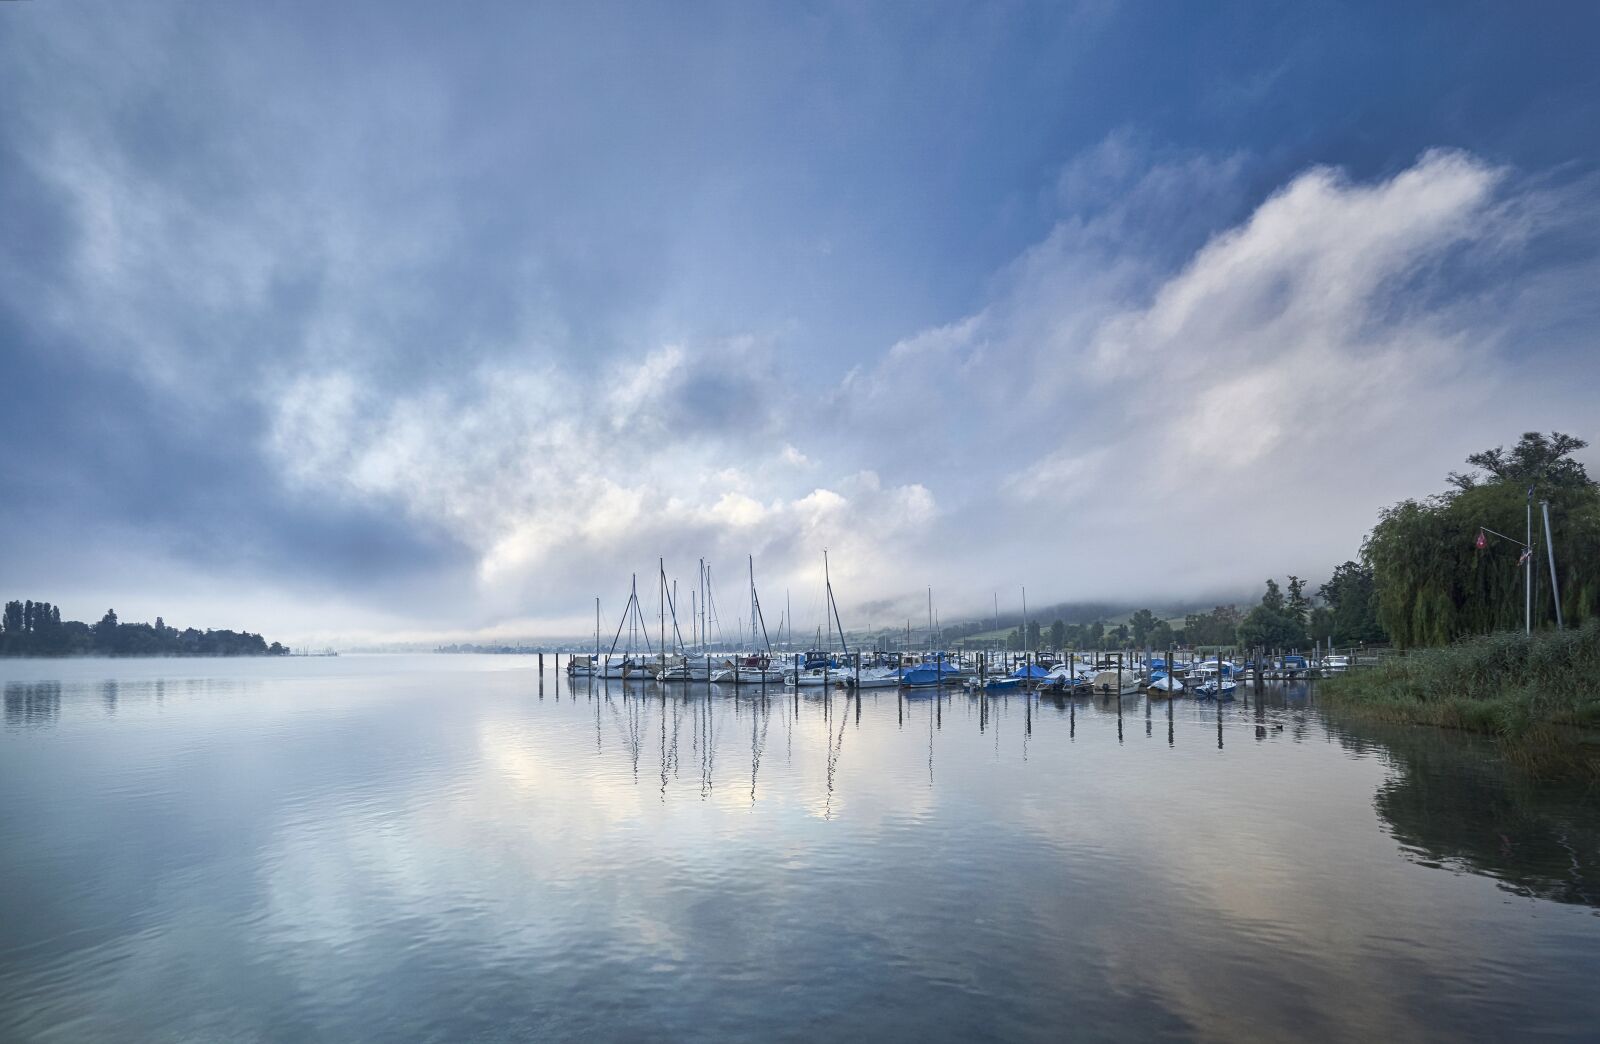 10-20mm F3.5 sample photo. Waterscape, lake, blue hour photography